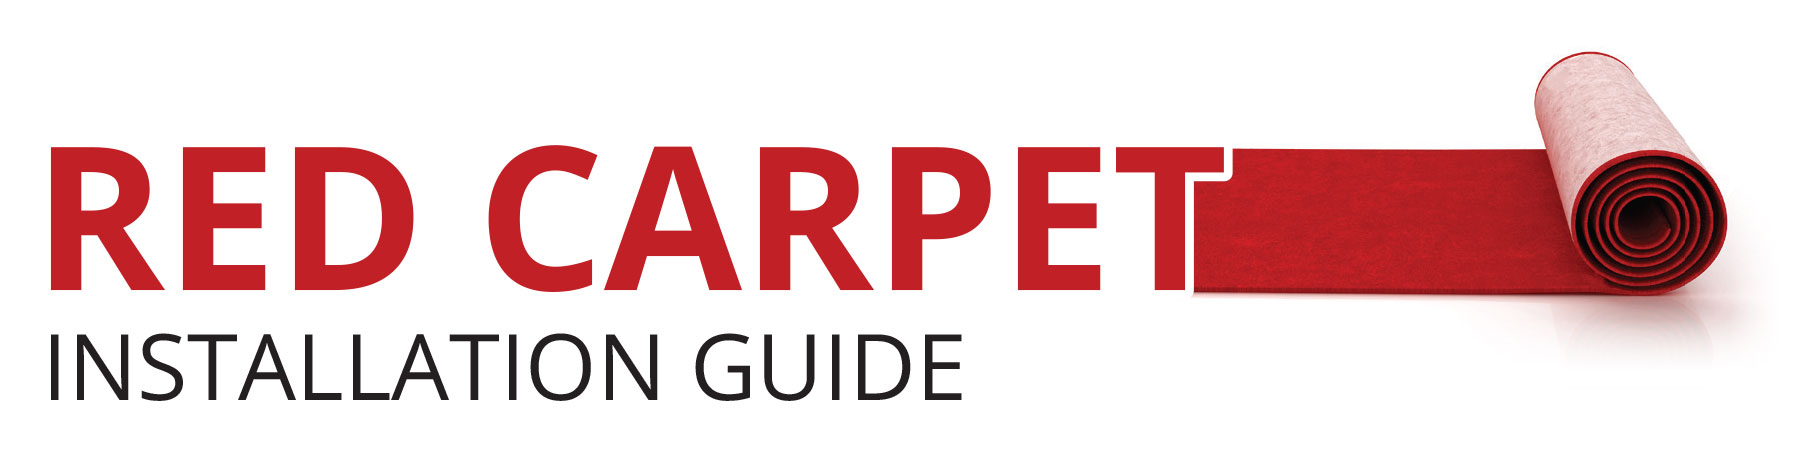 Red Carpet Installation Guide